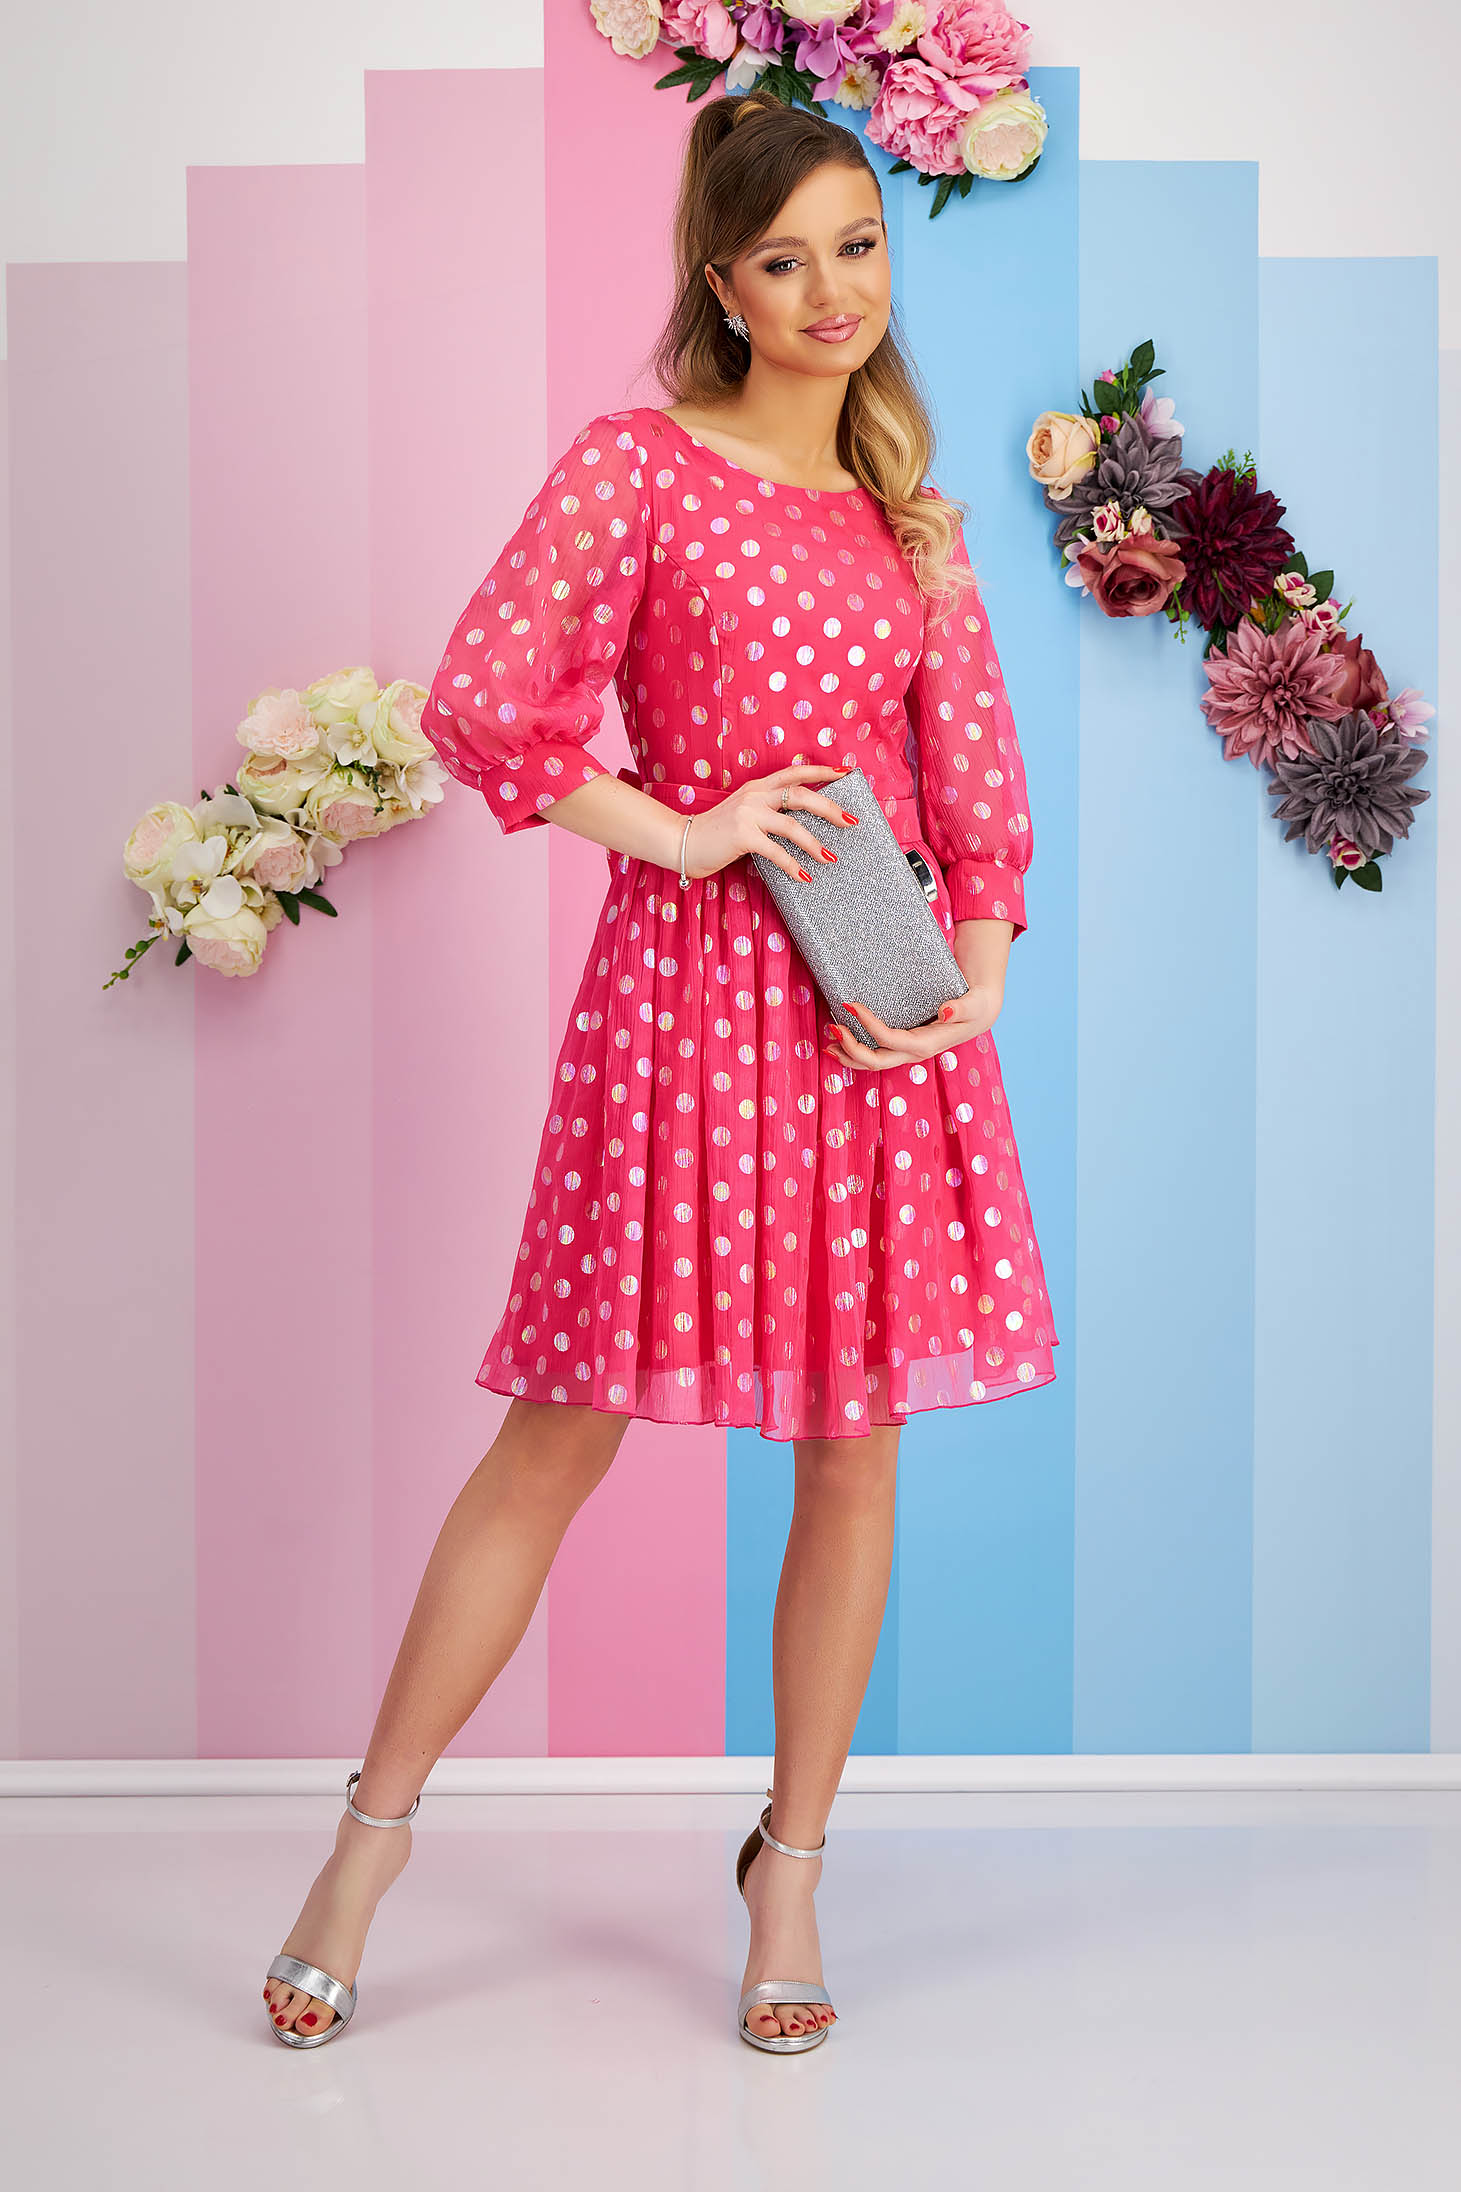 Fuchsia Veil Dress in A-line with Polka Dots Accessorized with Belt and Bow - StarShinerS 4 - StarShinerS.com